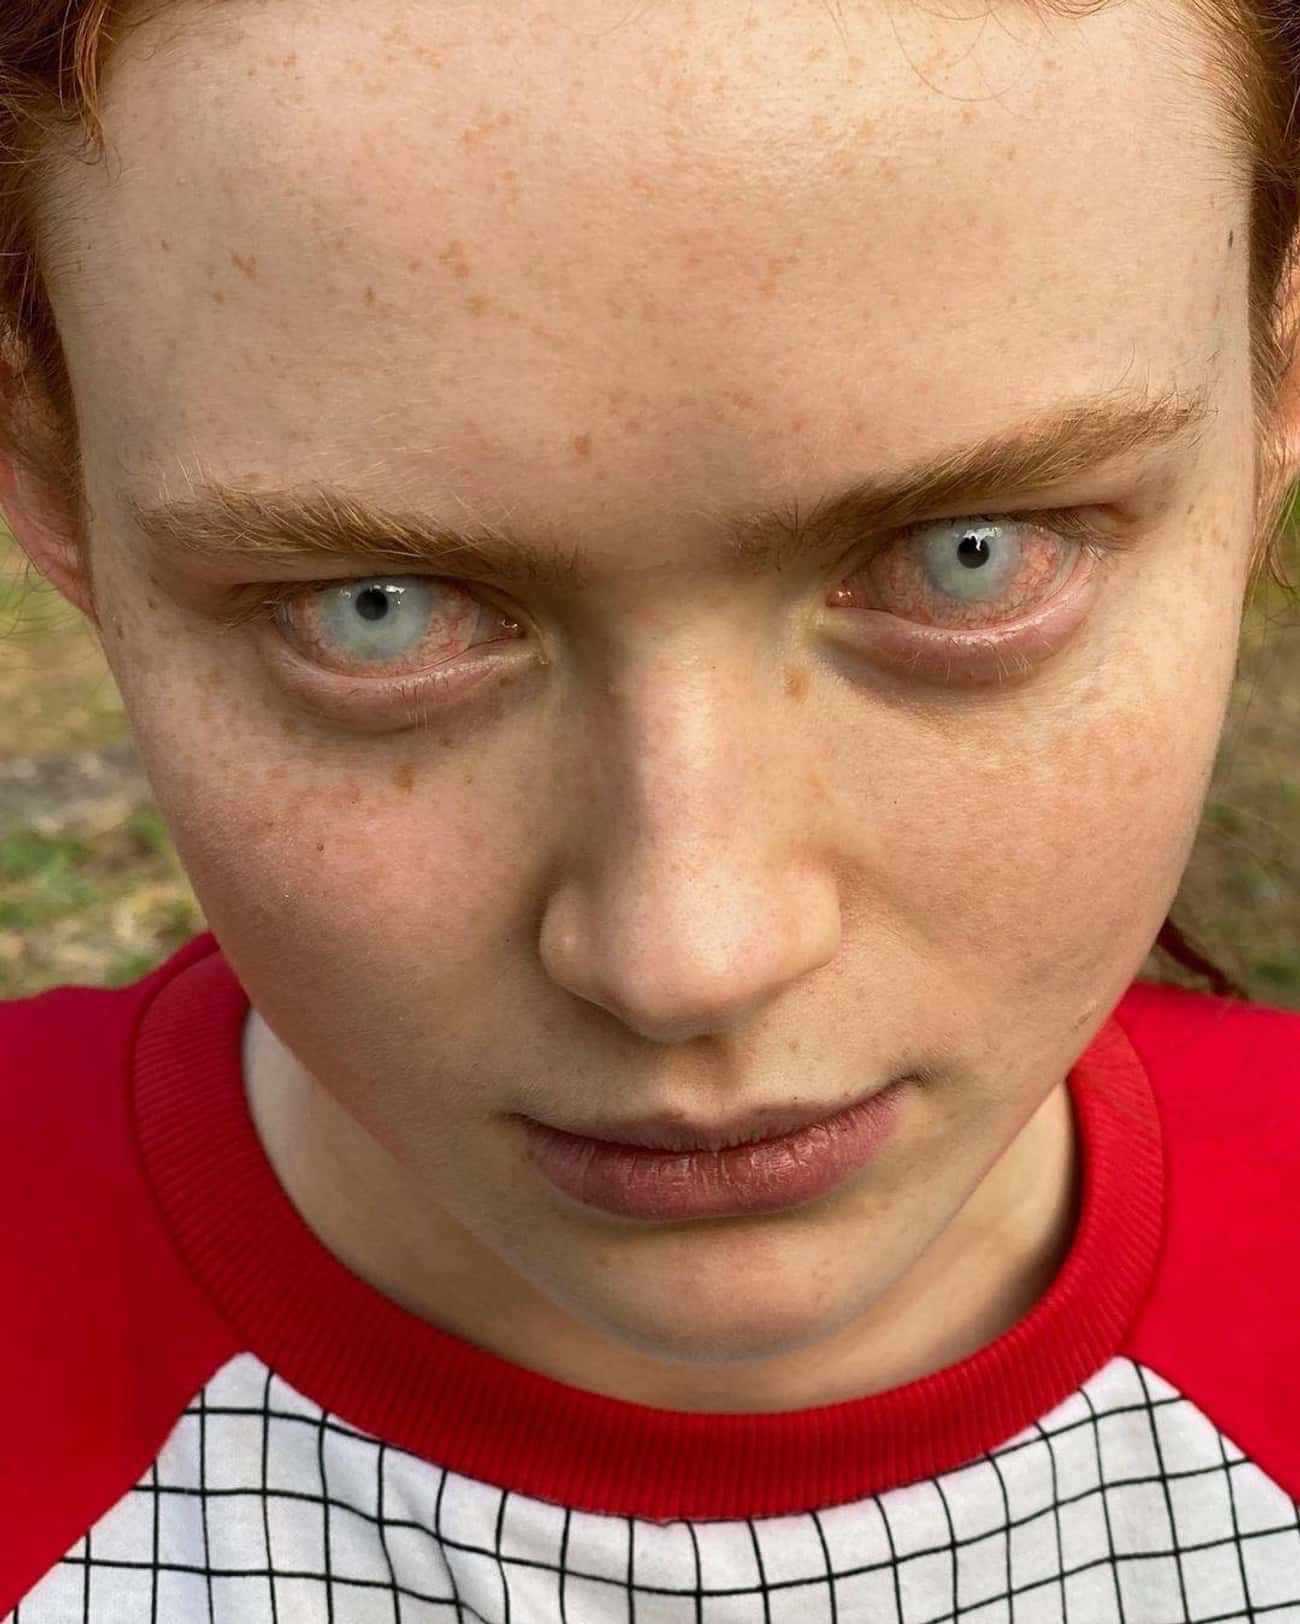 Max's Stare From 'Dear Billy' Episode Of 'Stranger Things'